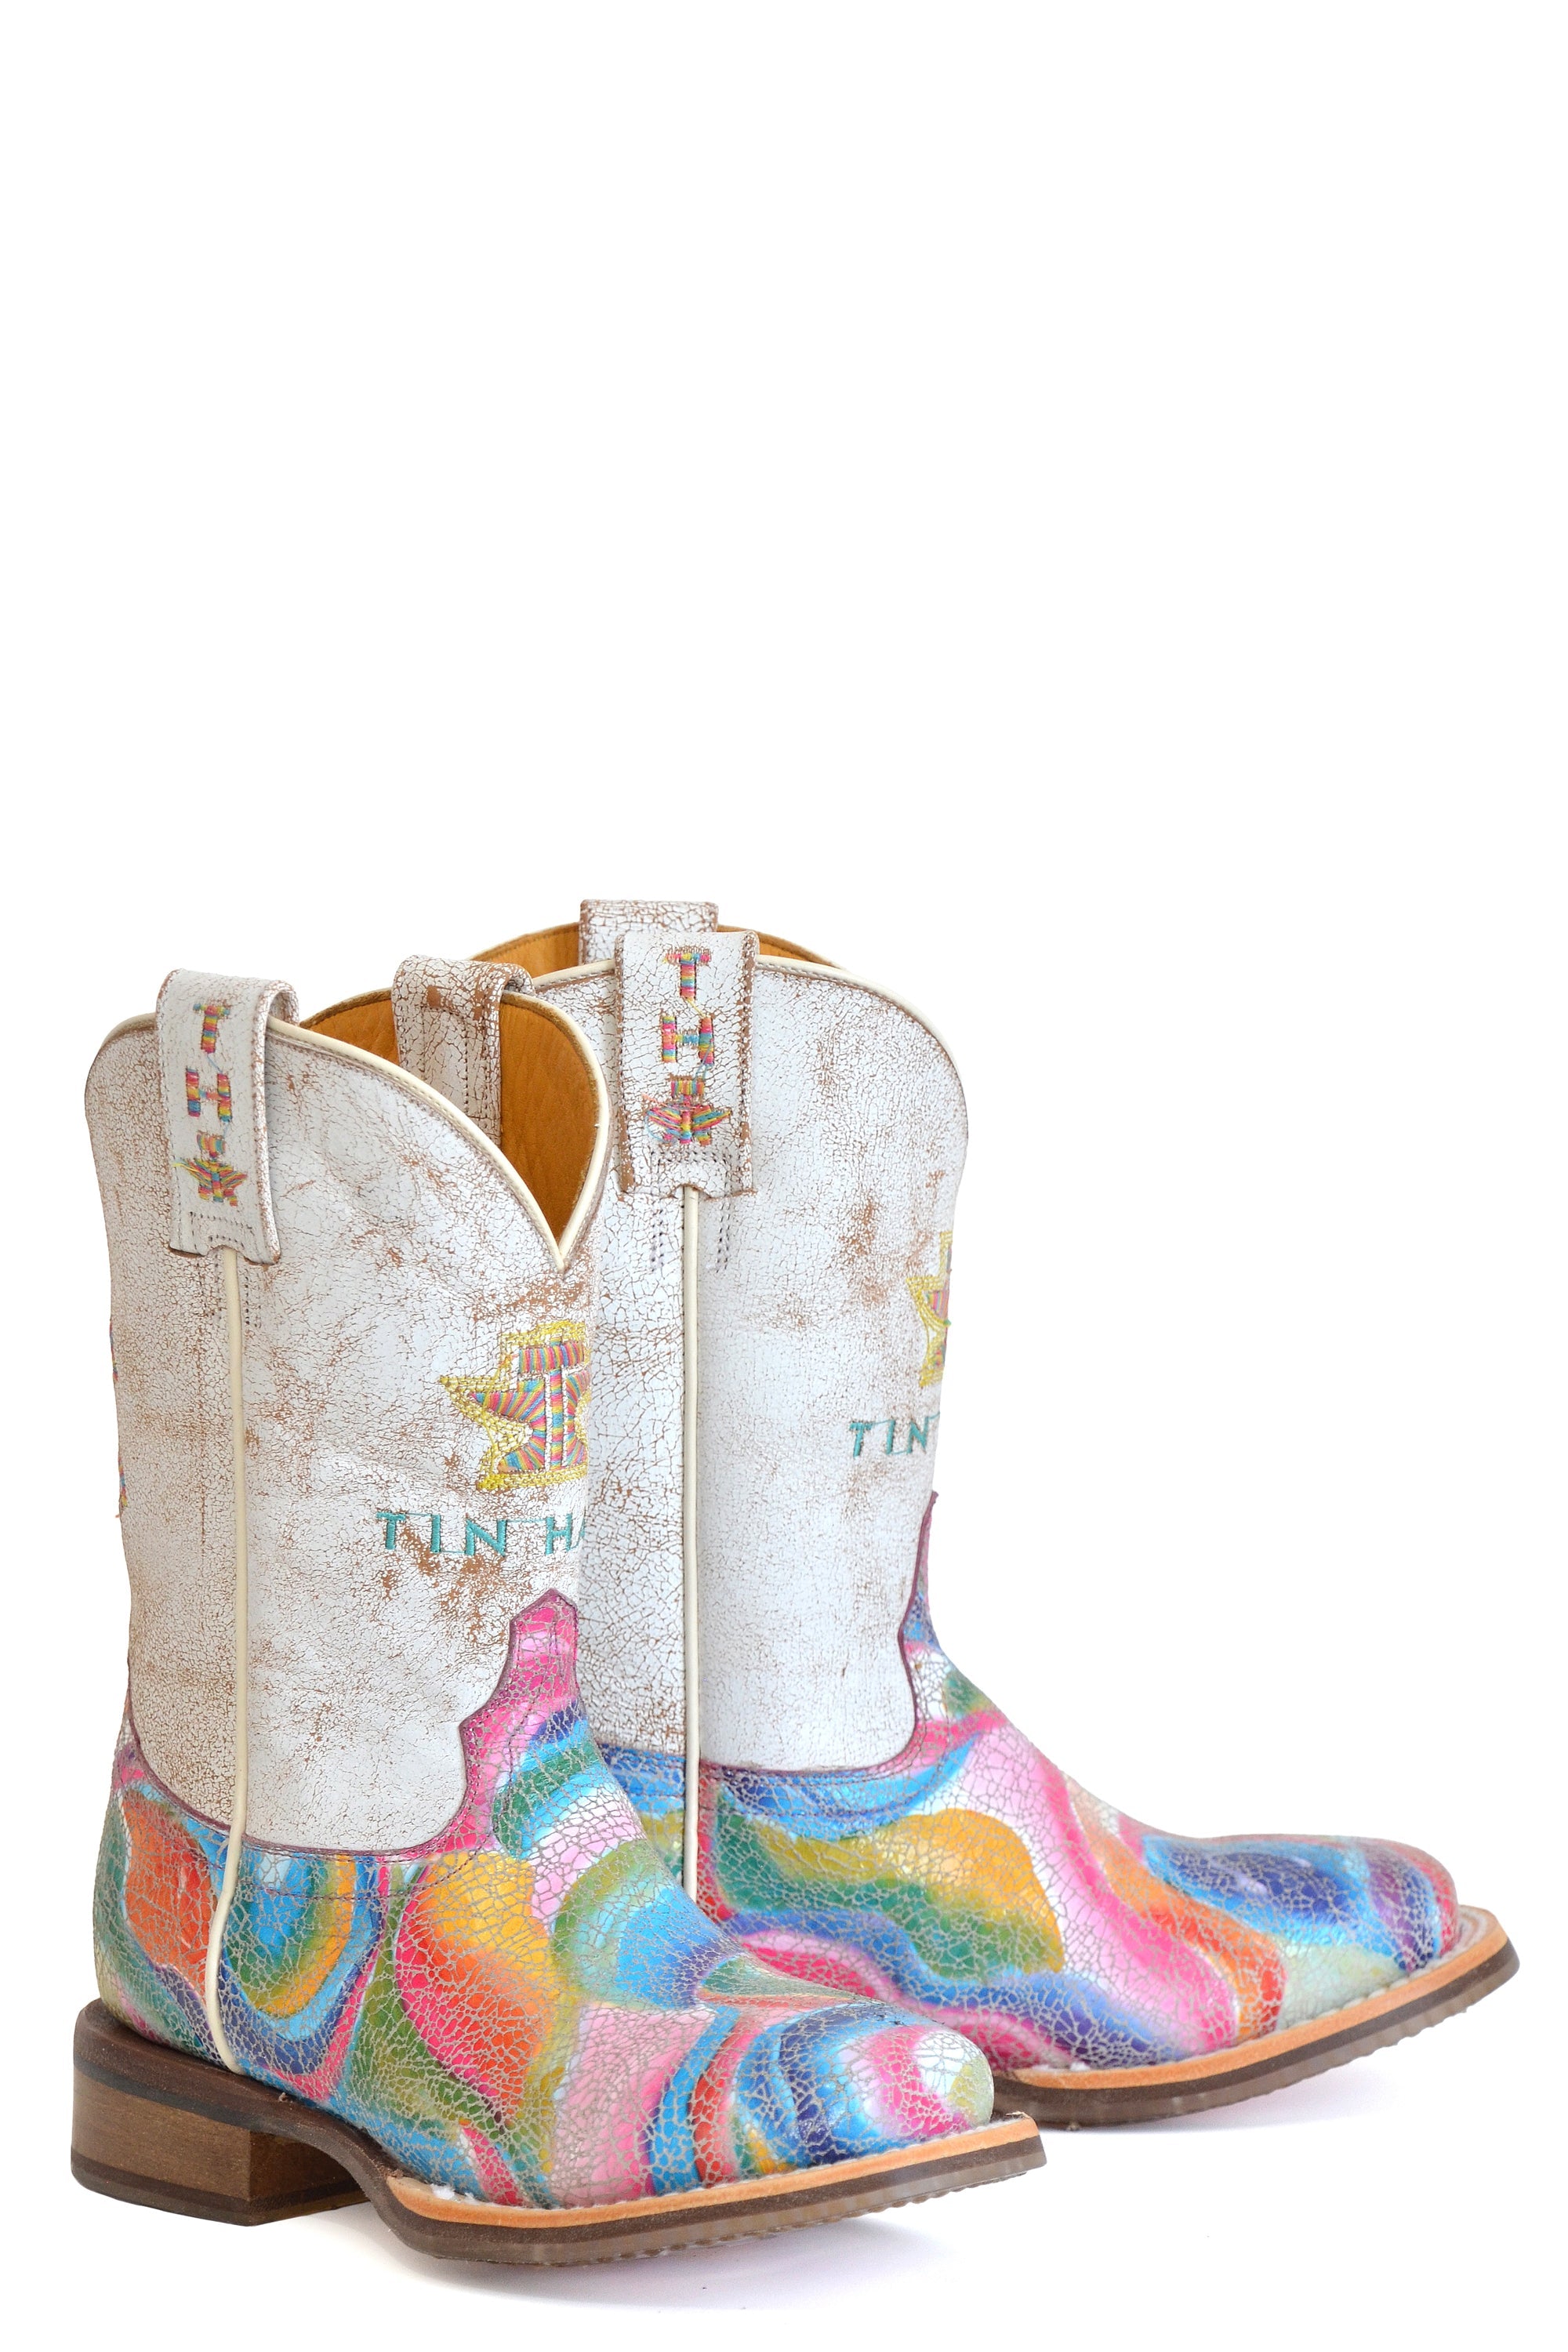 Tin Haul LITTLE GIRLS COLOR BURST WITH COWGIRL SOLE